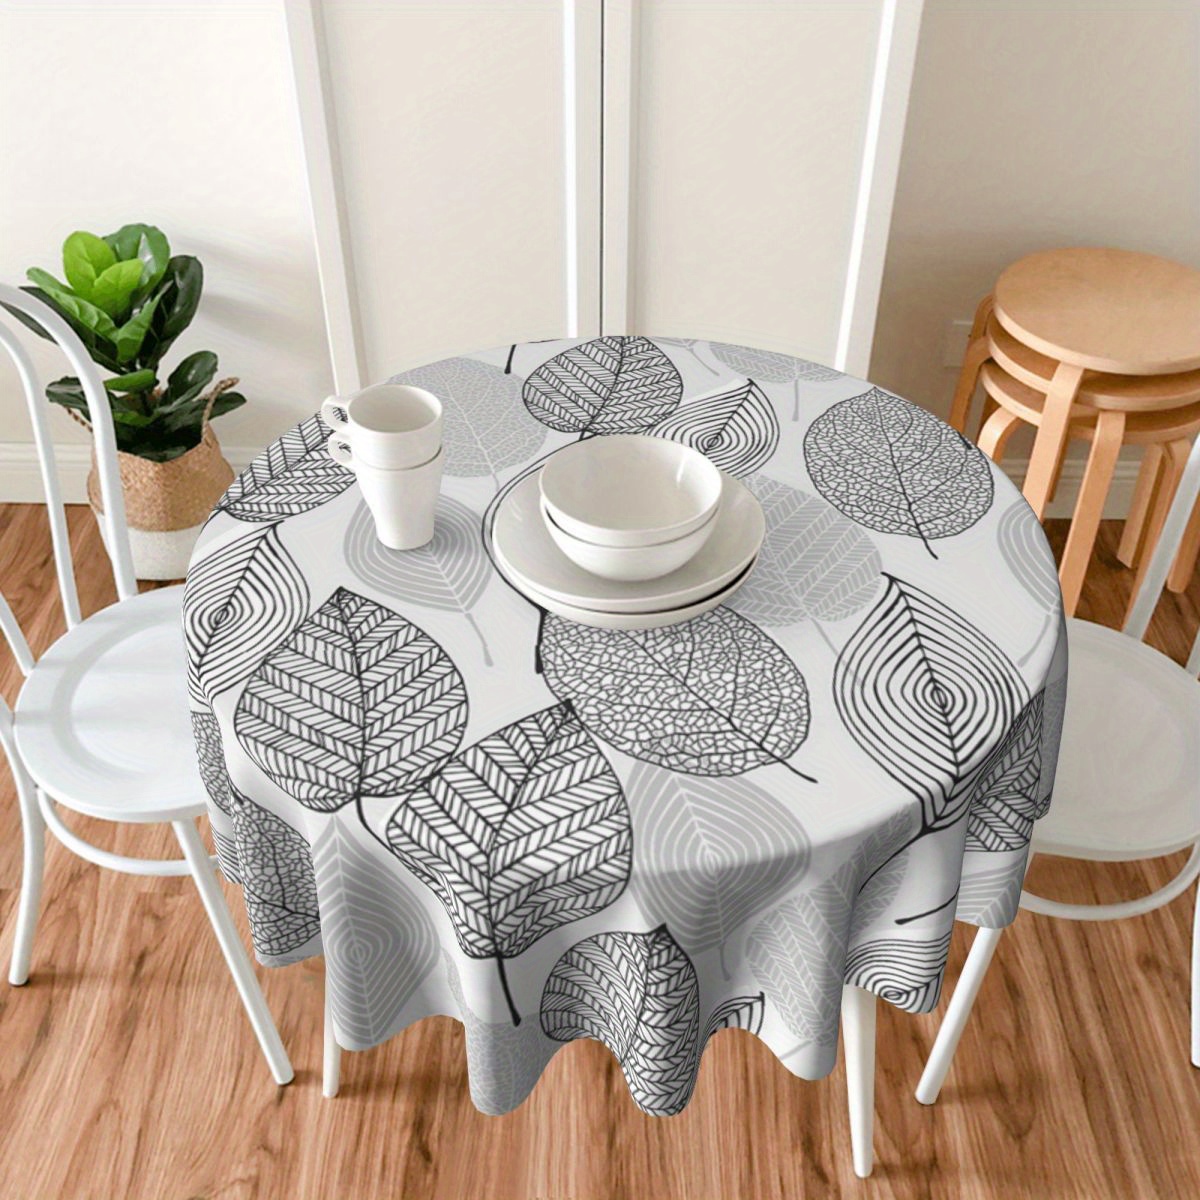 

Round Floral Pattern Tablecloth - Machine Washable Polyester Table Cover For Kitchen Dining Room, Woven Weave, Party Decoration, Home Decor - 1pc Leaf Design Table Linen